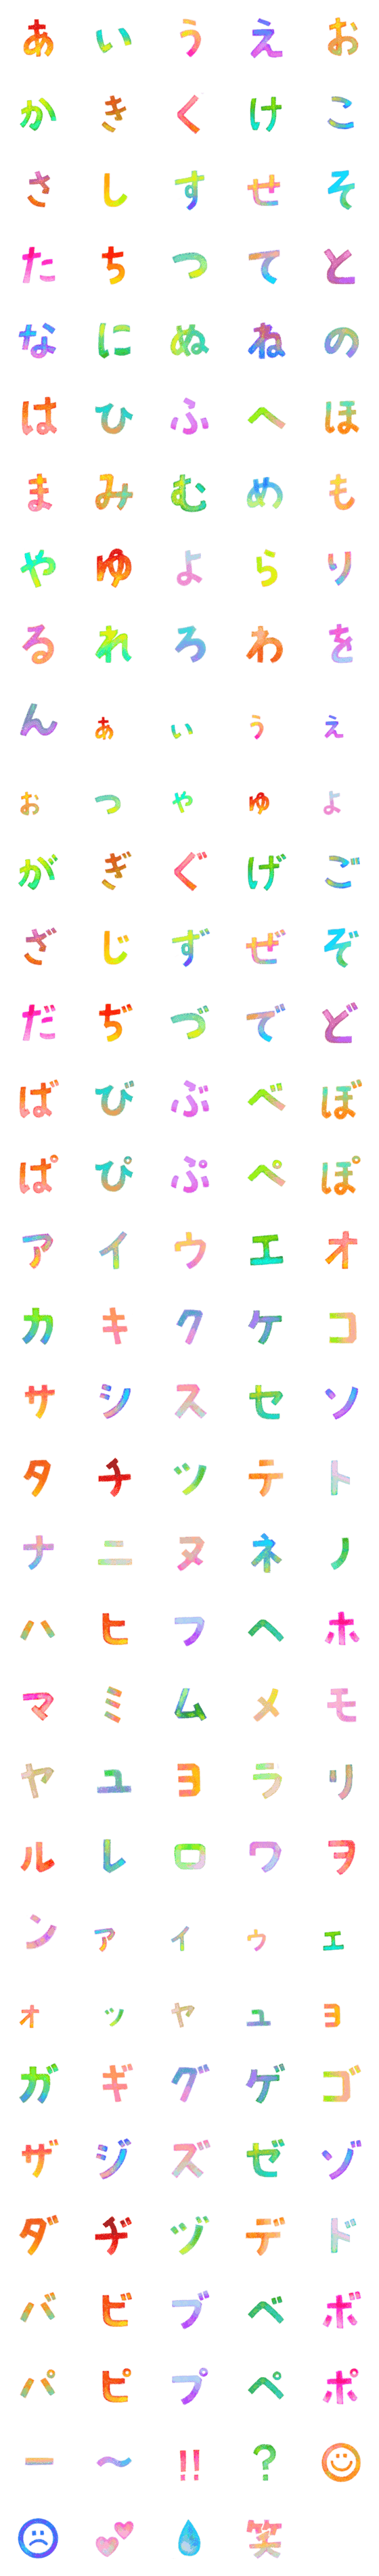 [LINE絵文字]綺麗で癒される文字の画像一覧